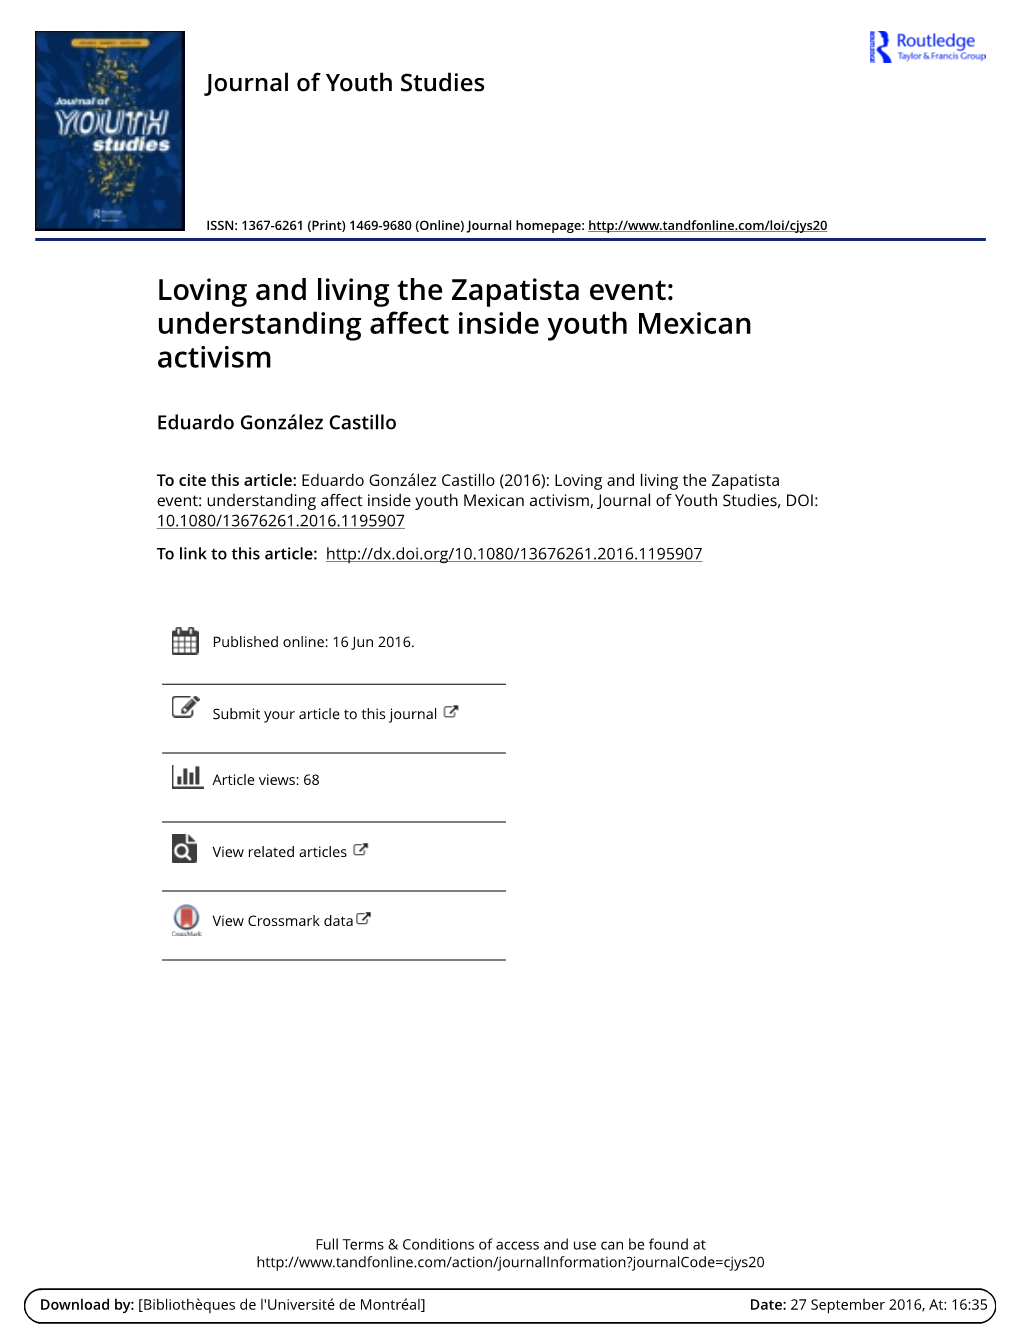 Loving and Living the Zapatista Event: Understanding Affect Inside Youth Mexican Activism